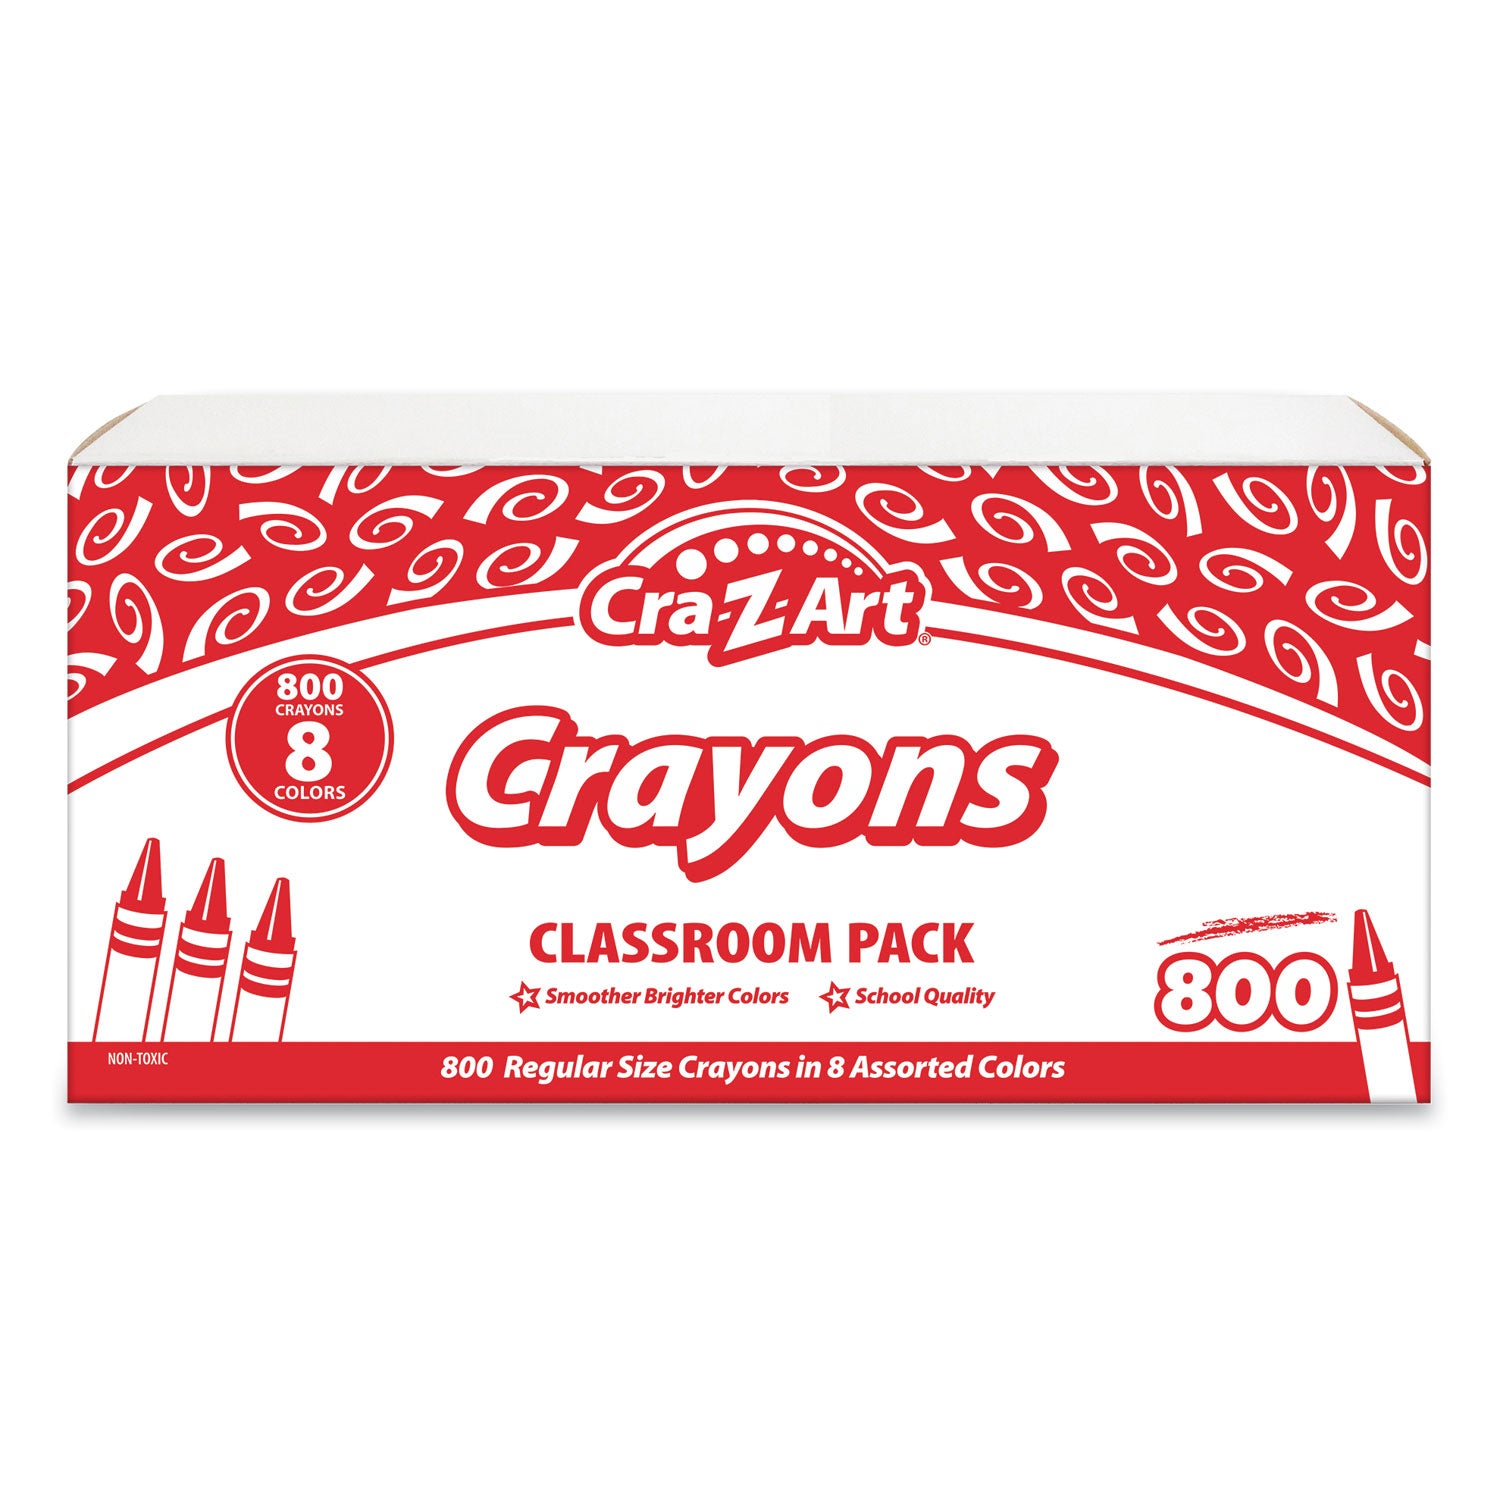 crayons-8-assorted-colors-800-pack_cza740031 - 1